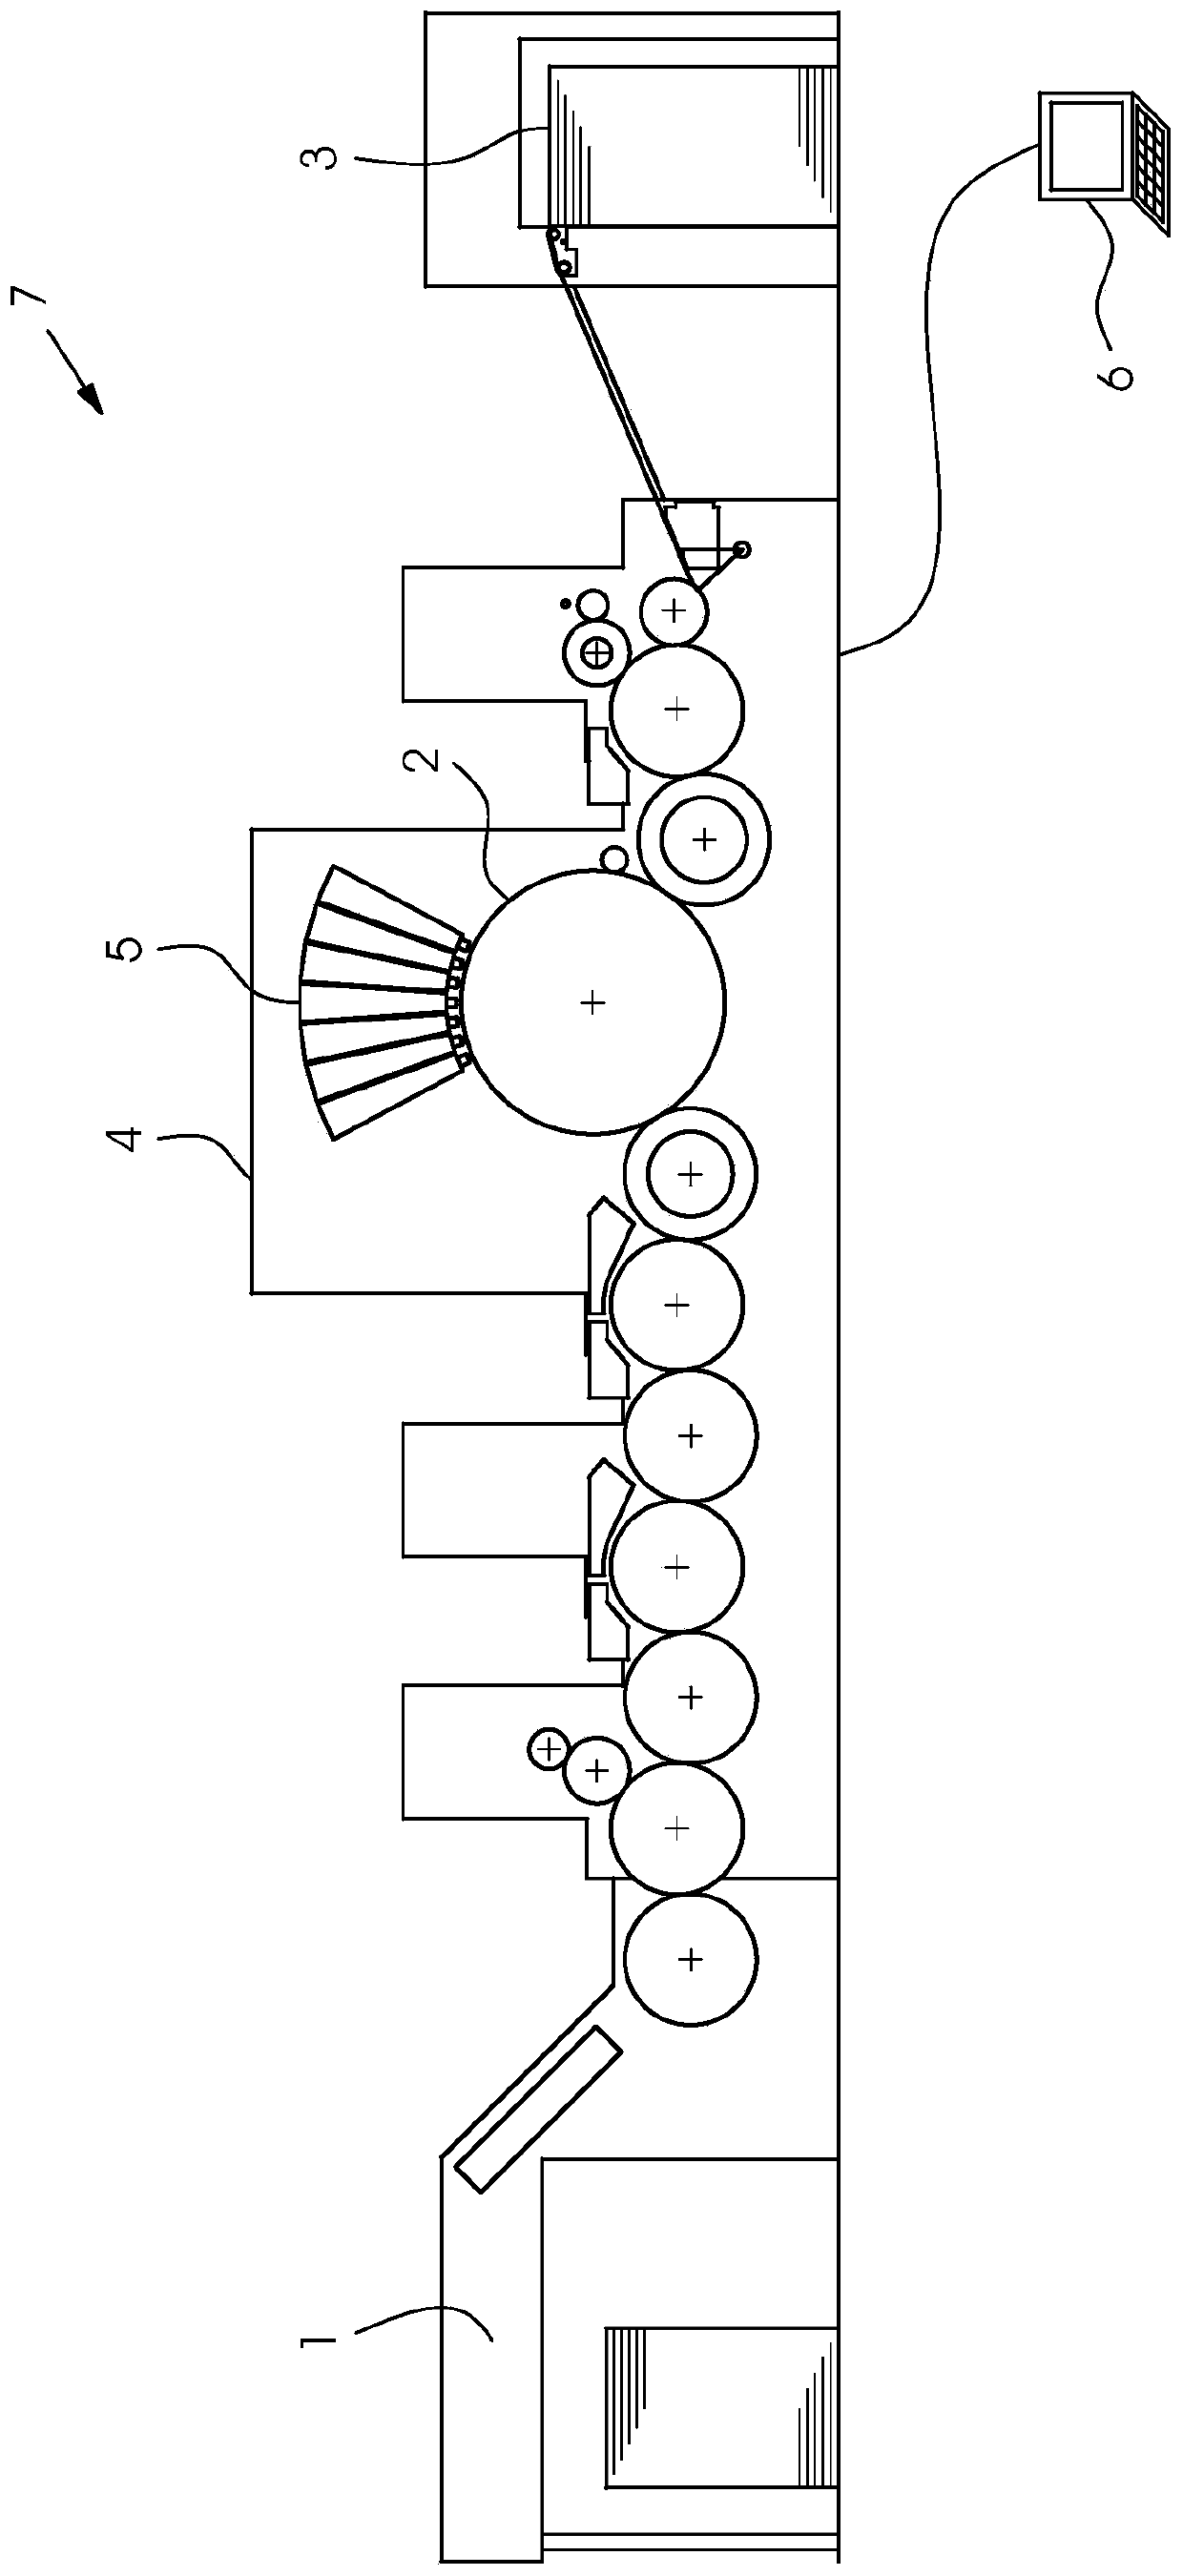 Method for compensating for defective printing nozzles in an inkjet printing machine